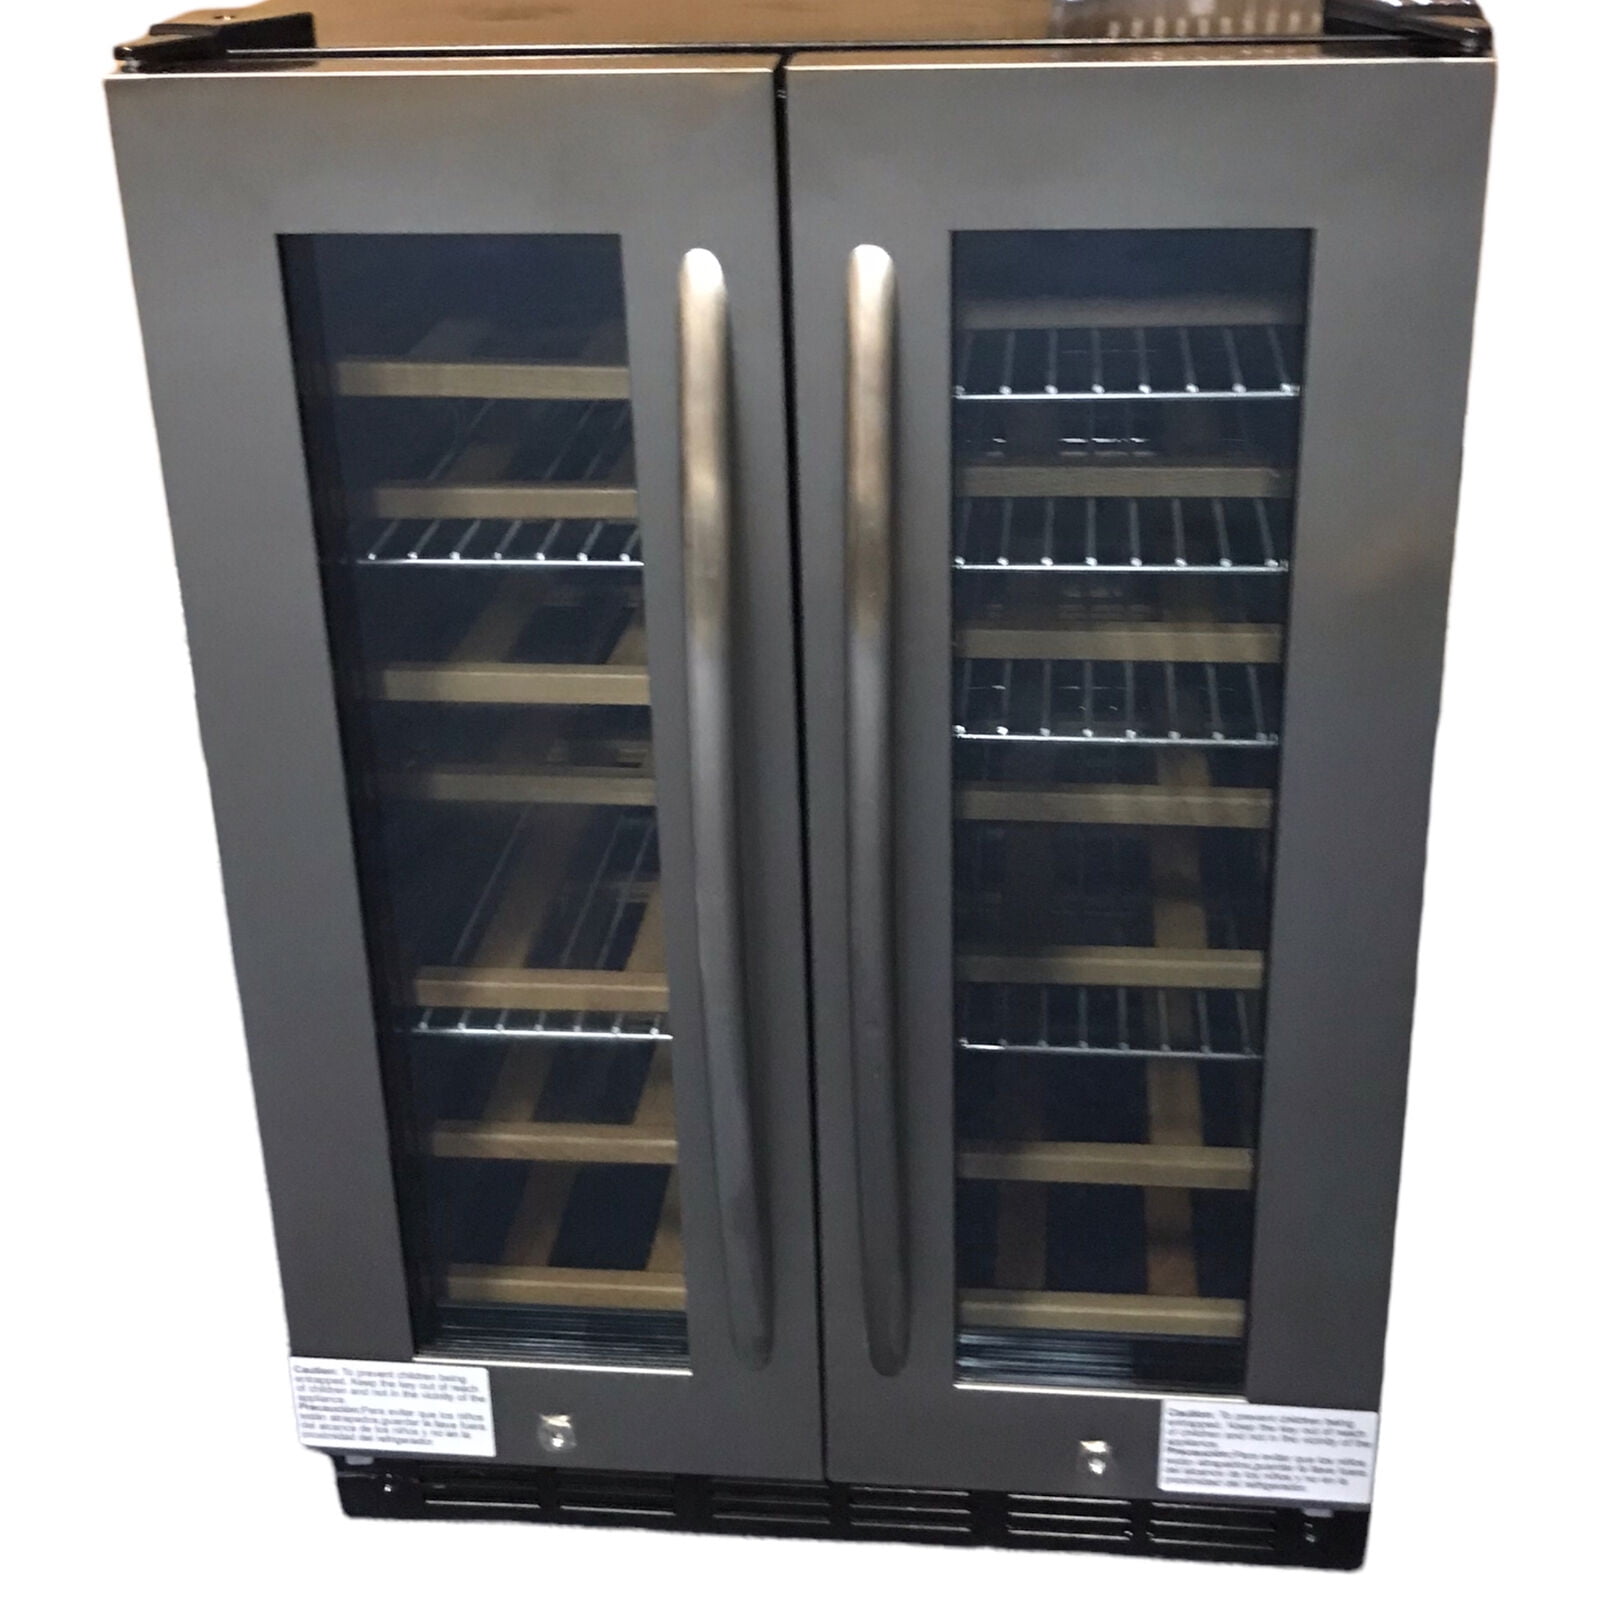 Insignia™ 165-Can Built-In Beverage Cooler Stainless Steel NS-BC1ZSS9 -  Best Buy